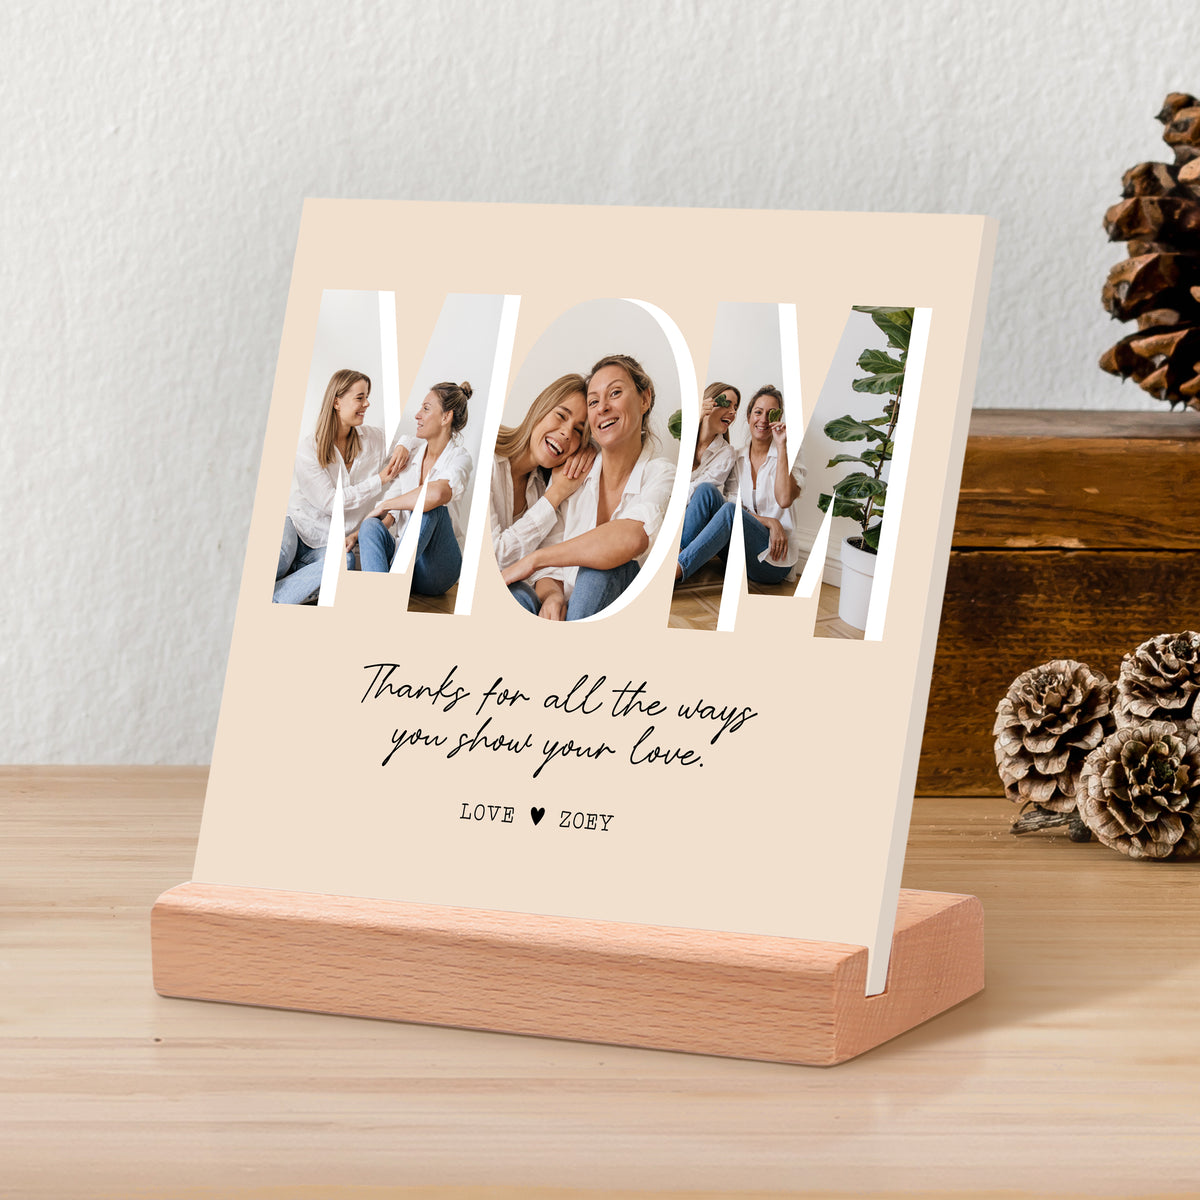 Personalized Photo Gifts for Mom Most Thoughtful Gifts with Custom Message